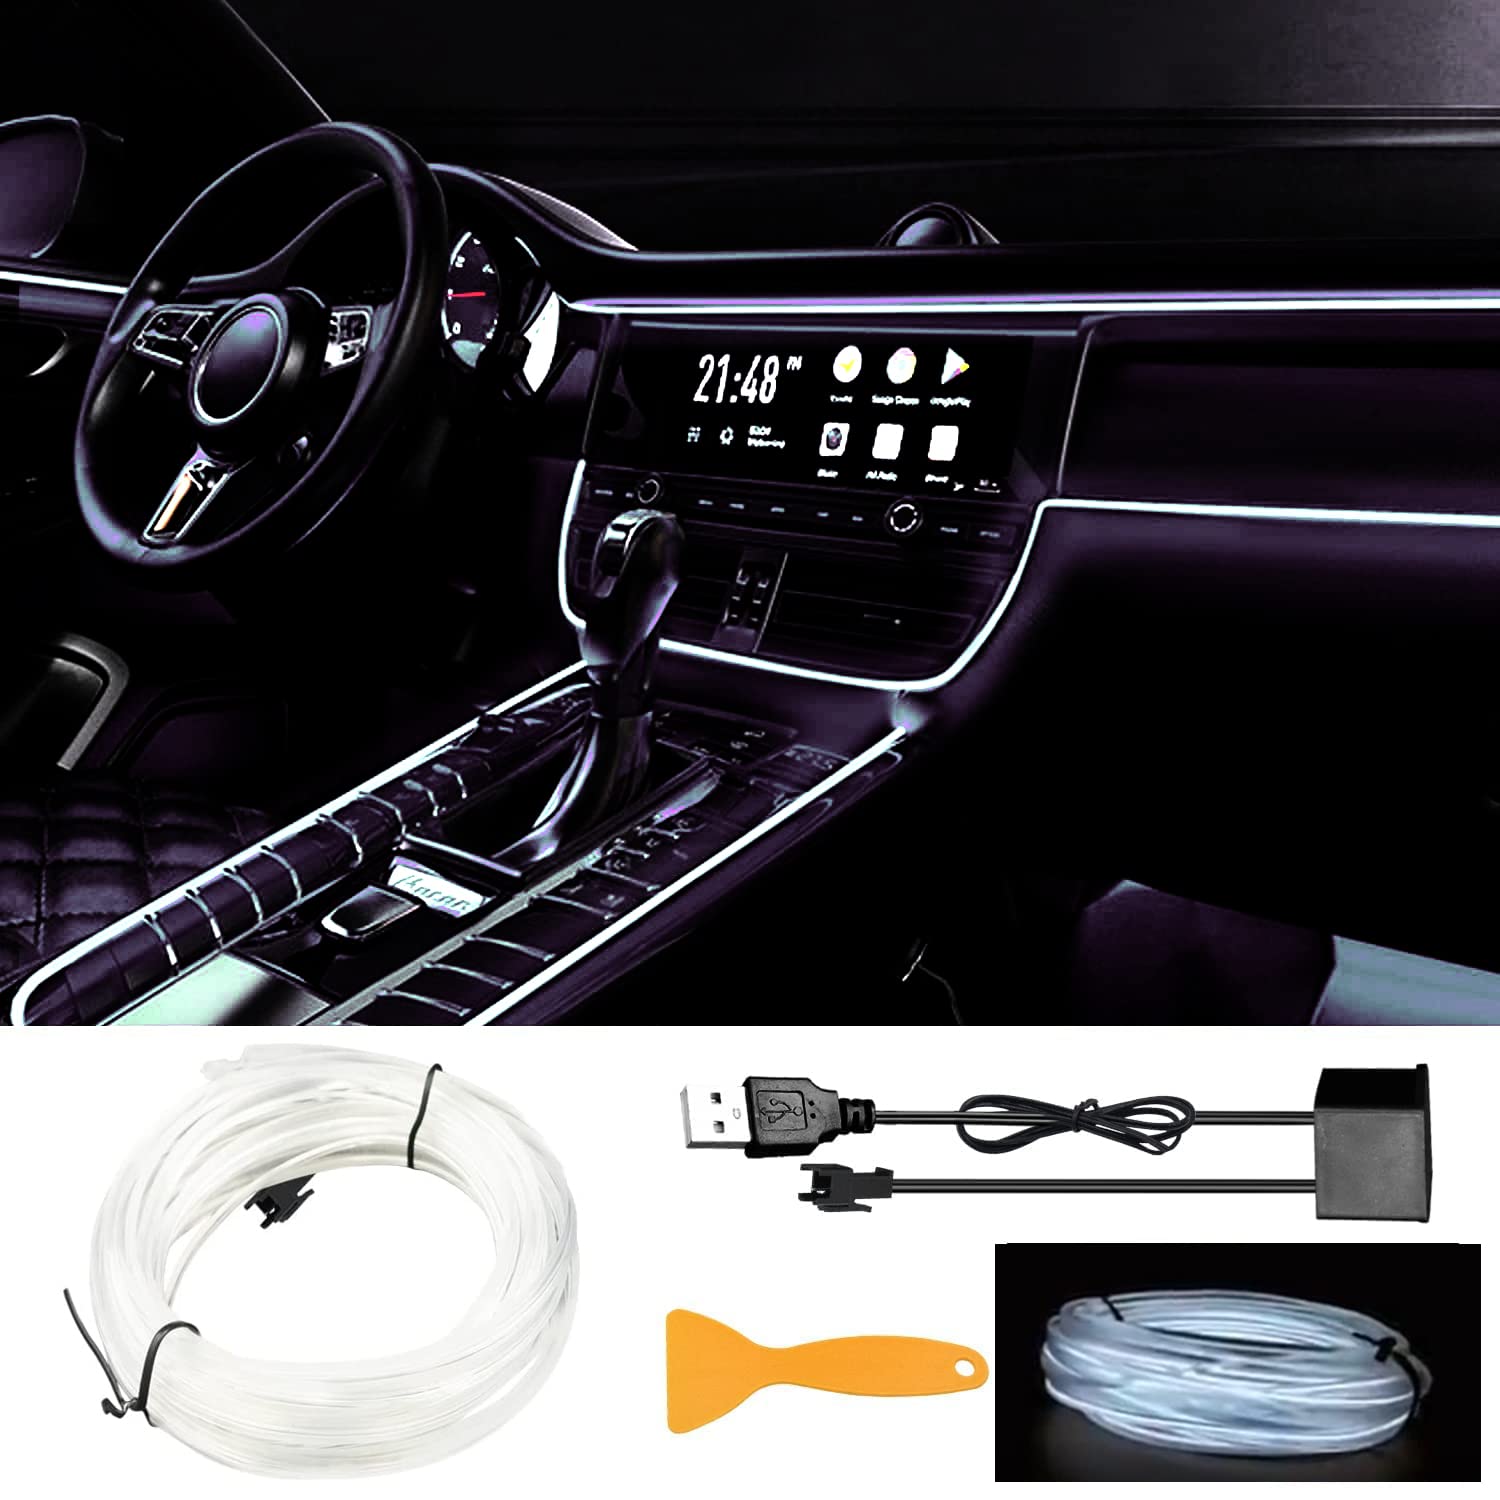 EL Wire Car LED Interior Lights Strip USB Neon Wire Lights 197 inch 6mm Sewing Edge Glowing EL Wire Lights for Car Ambient Lighting Kit 5M/16.5ft Car Decorations LED Lights for Car Interior (weiß) von YEKUYEKU